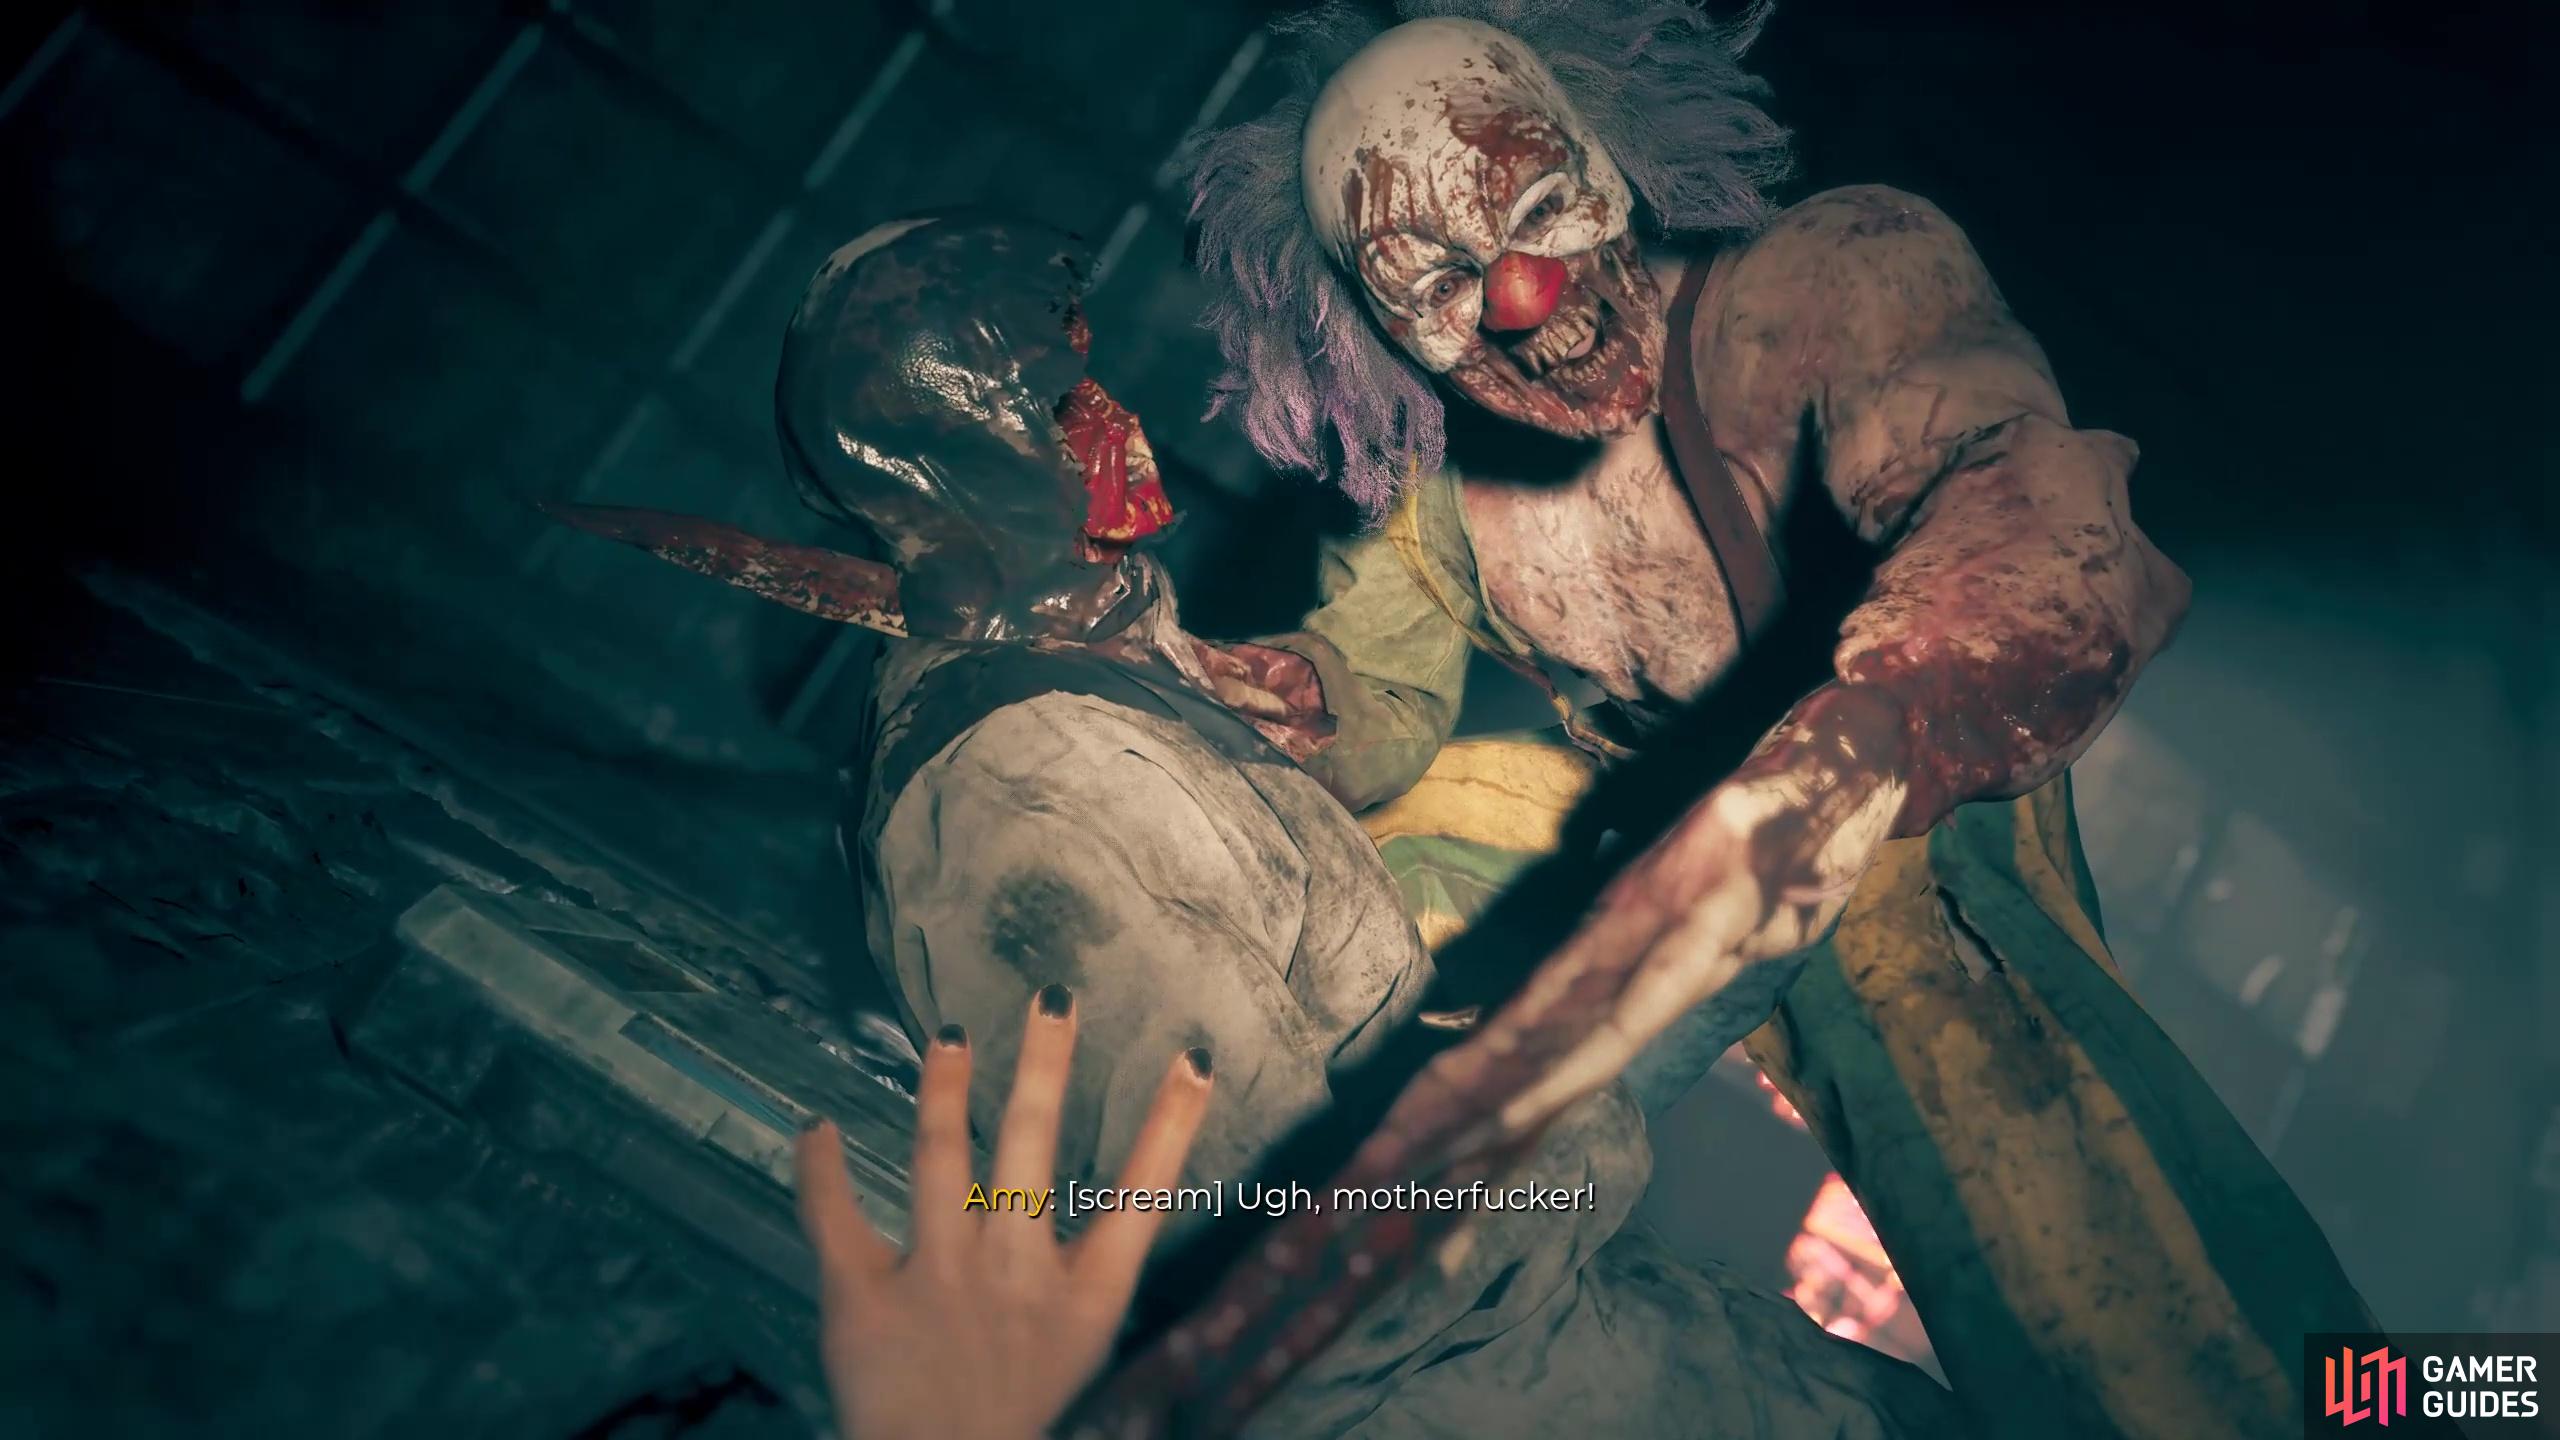 Butcho the Clown is a terrifying new zombie type. 